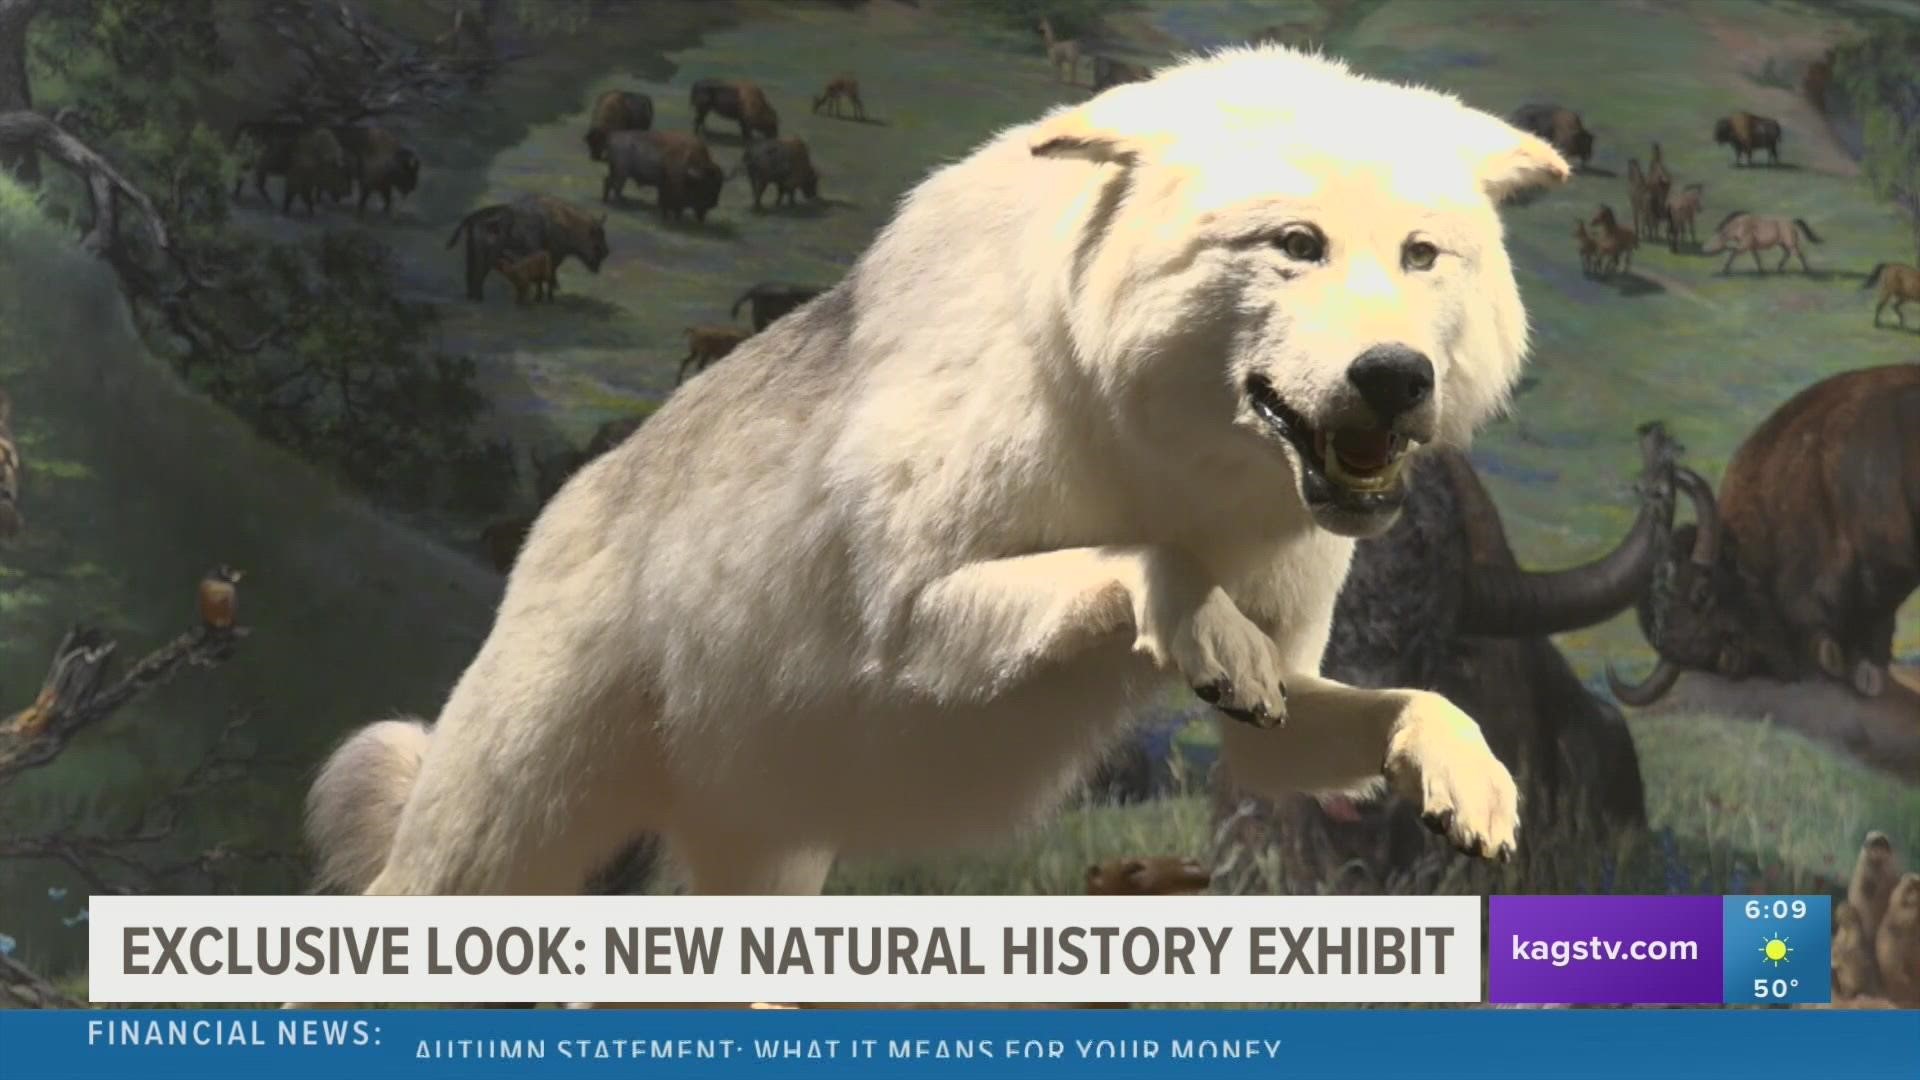 On Friday, Nov. 18 the Brazos Valley Museum of Natural History will unveil their new human canine history exhibit, which will feature fossils, history, and more.